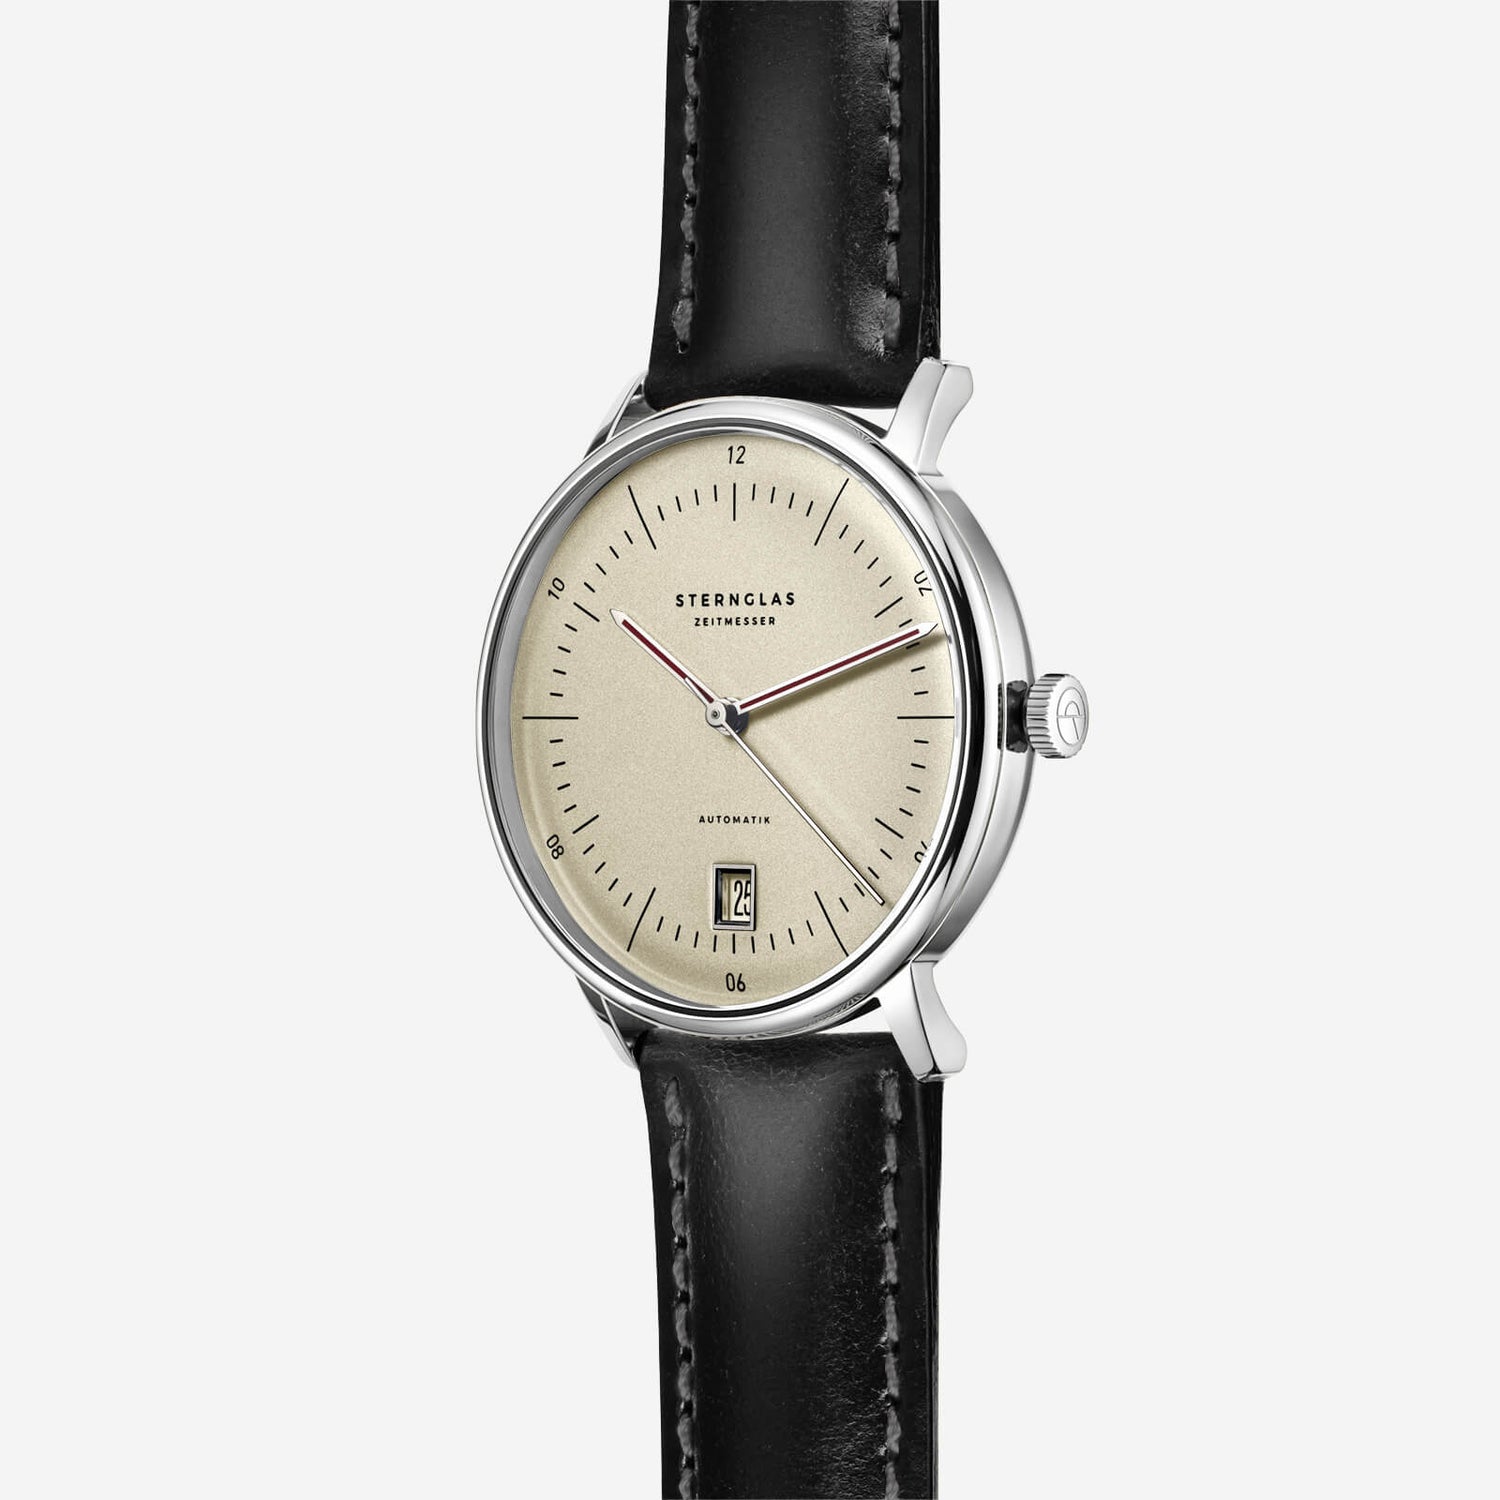 popup|Classical Bauhaus design|Inspired by the Bauhaus movement of the 1920s, the dial is reduced and kept clear. Further highlights are the silver-coloured date frame and the red accents of the hands, as well as the satin-finished dial in "alabaster".